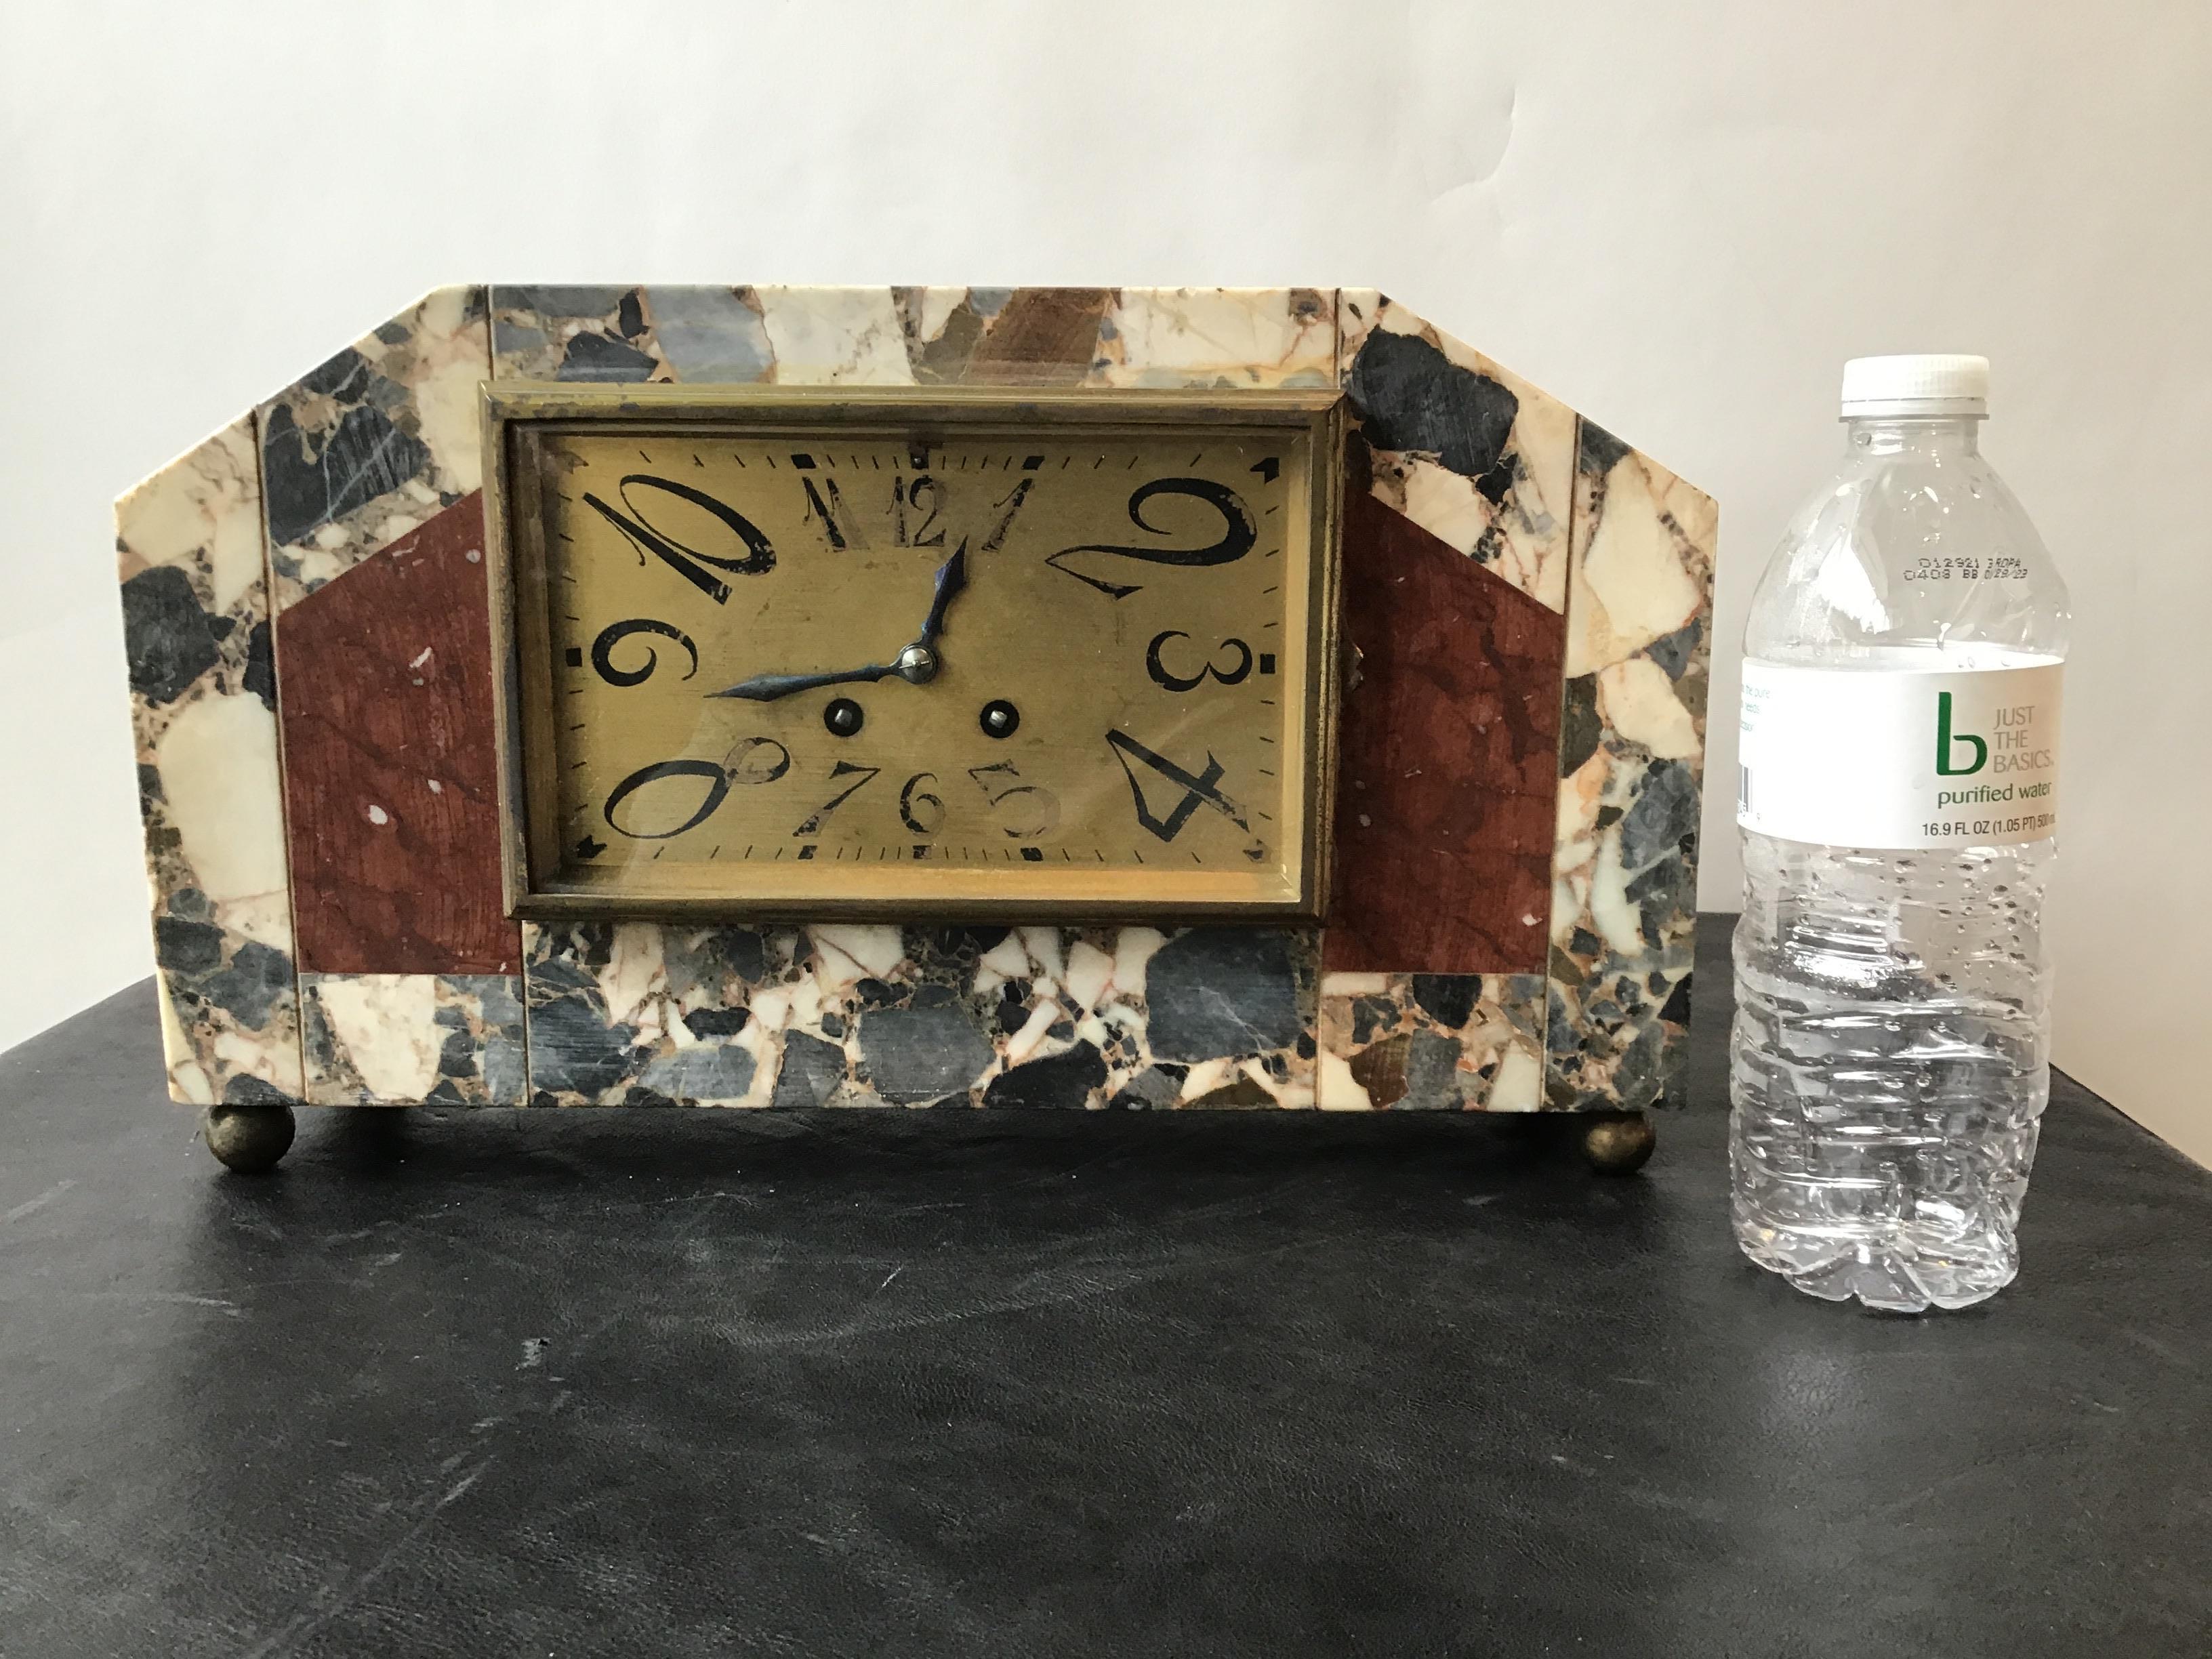 1920s French Deco marble mantle clock. I did not try to start this clock. I’m selling it as broken. It does not work.